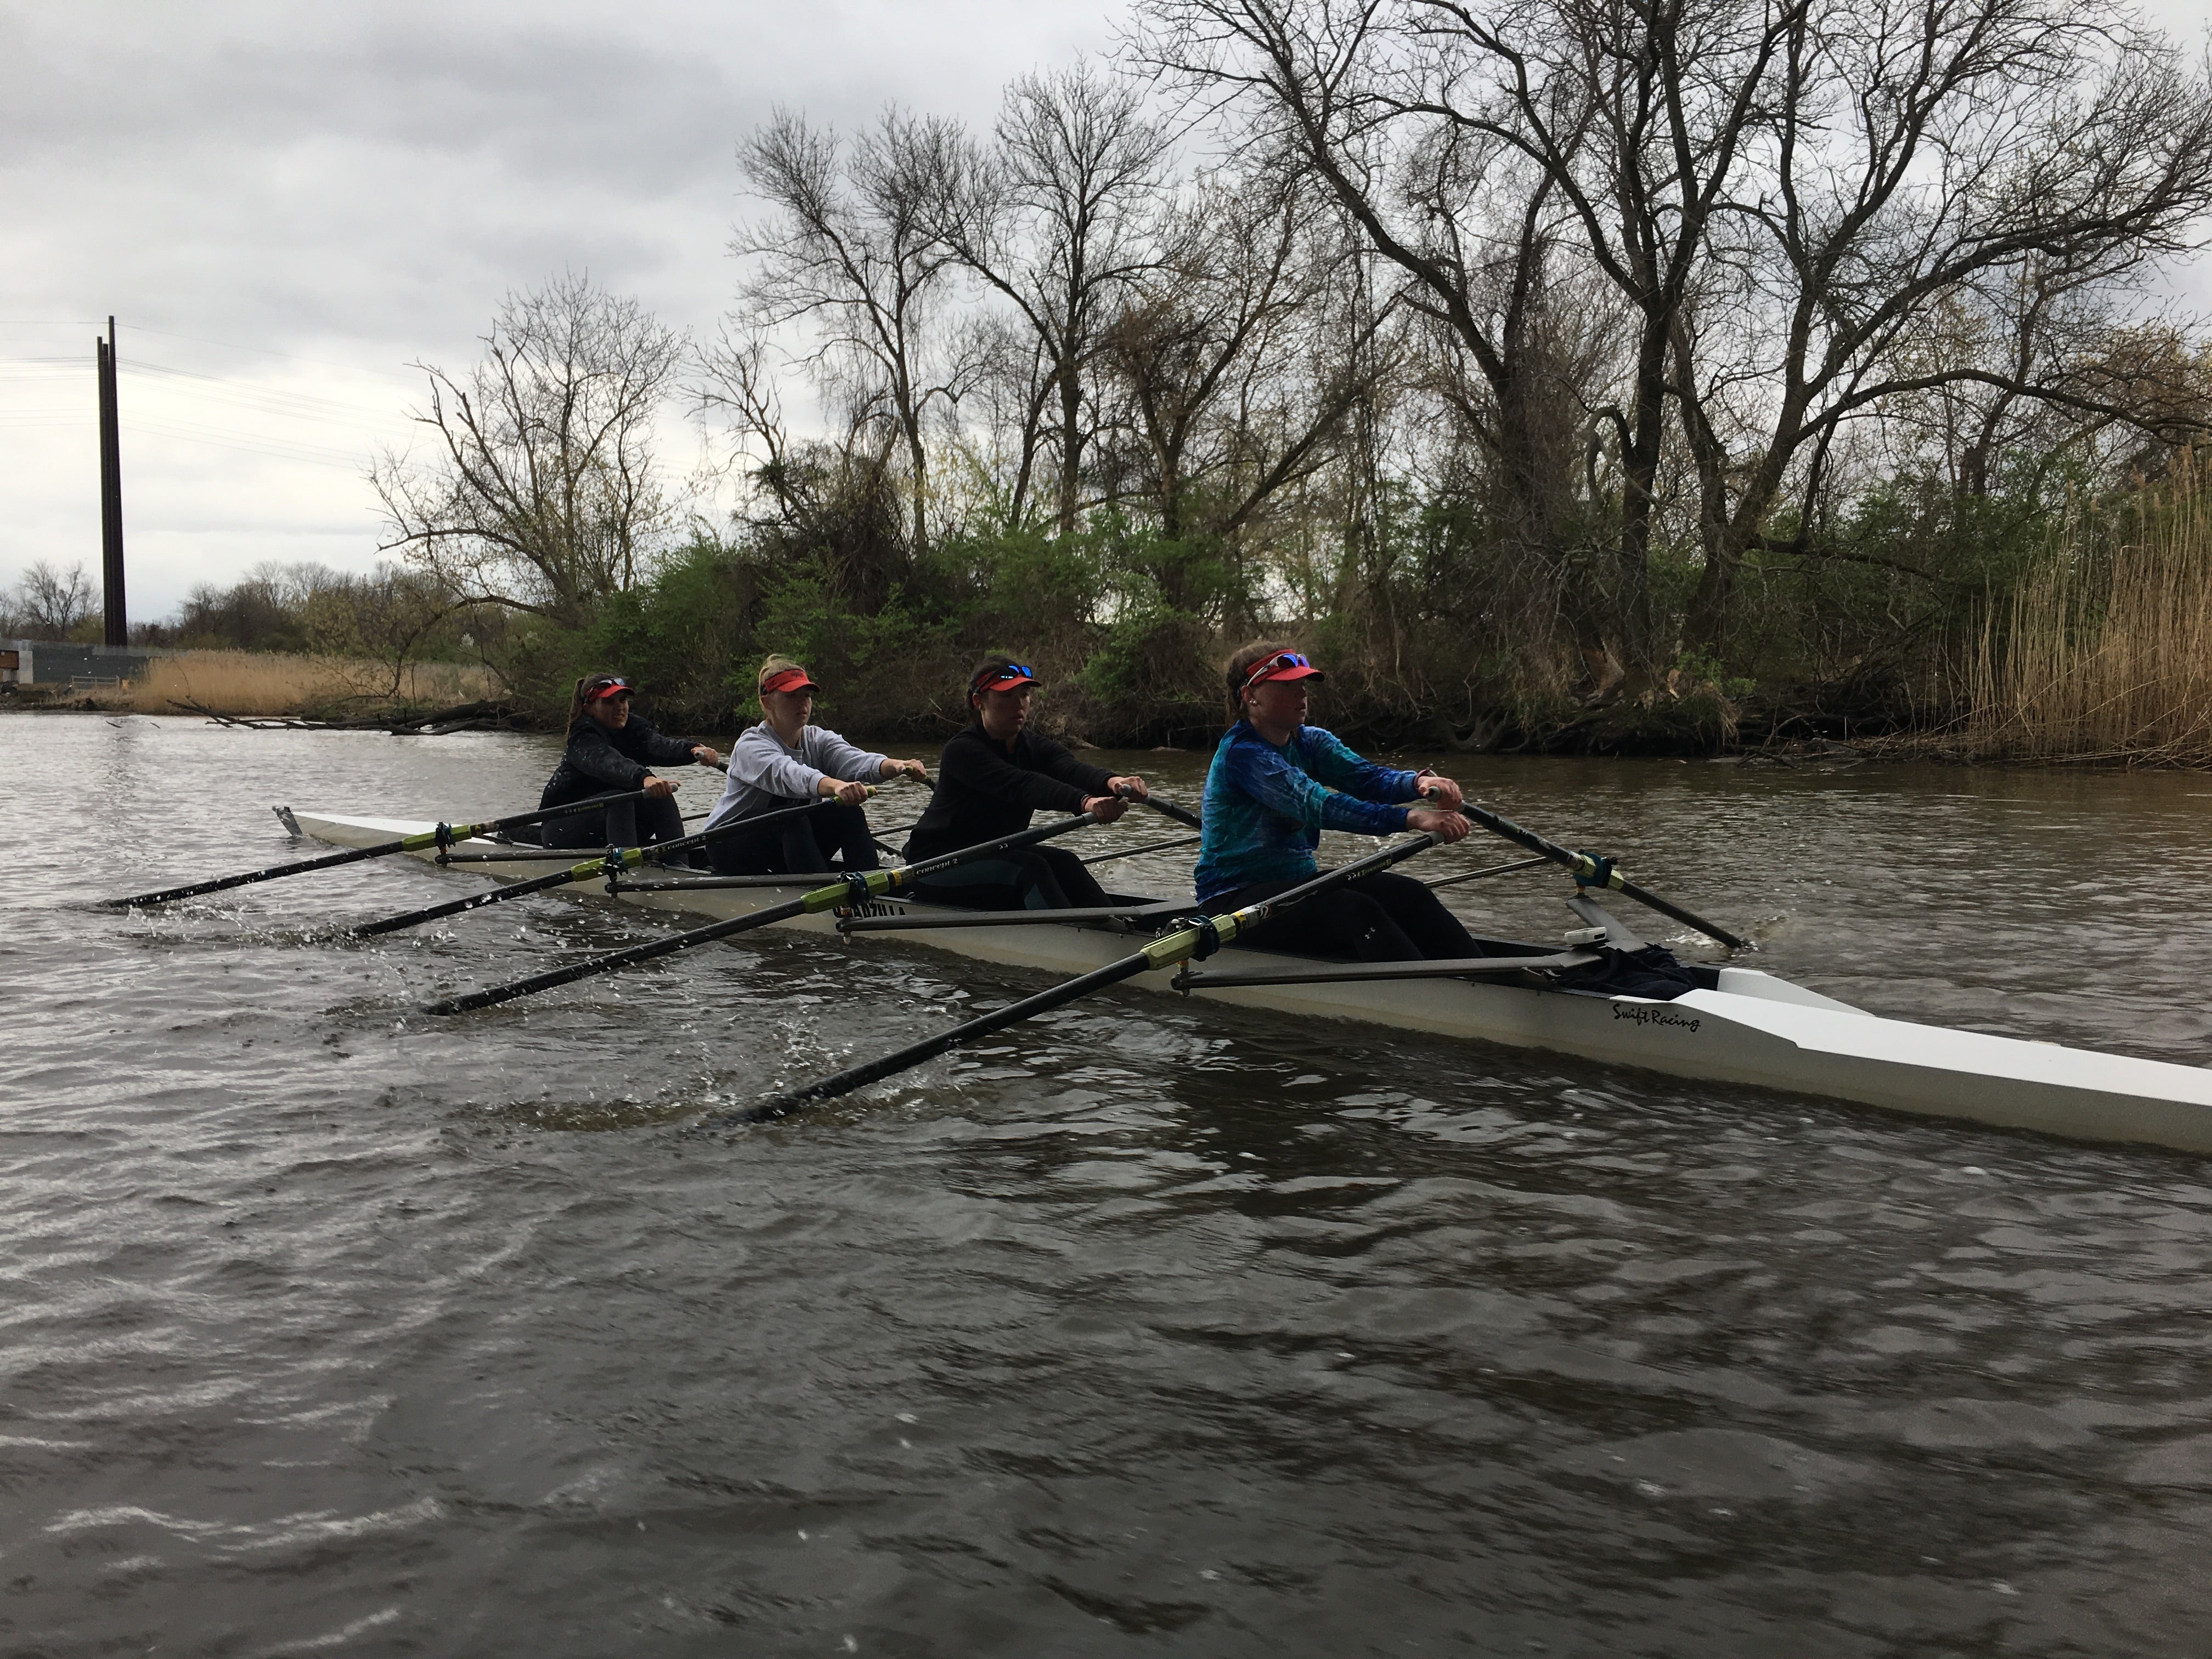 Delaware rowers see urban river in a different light